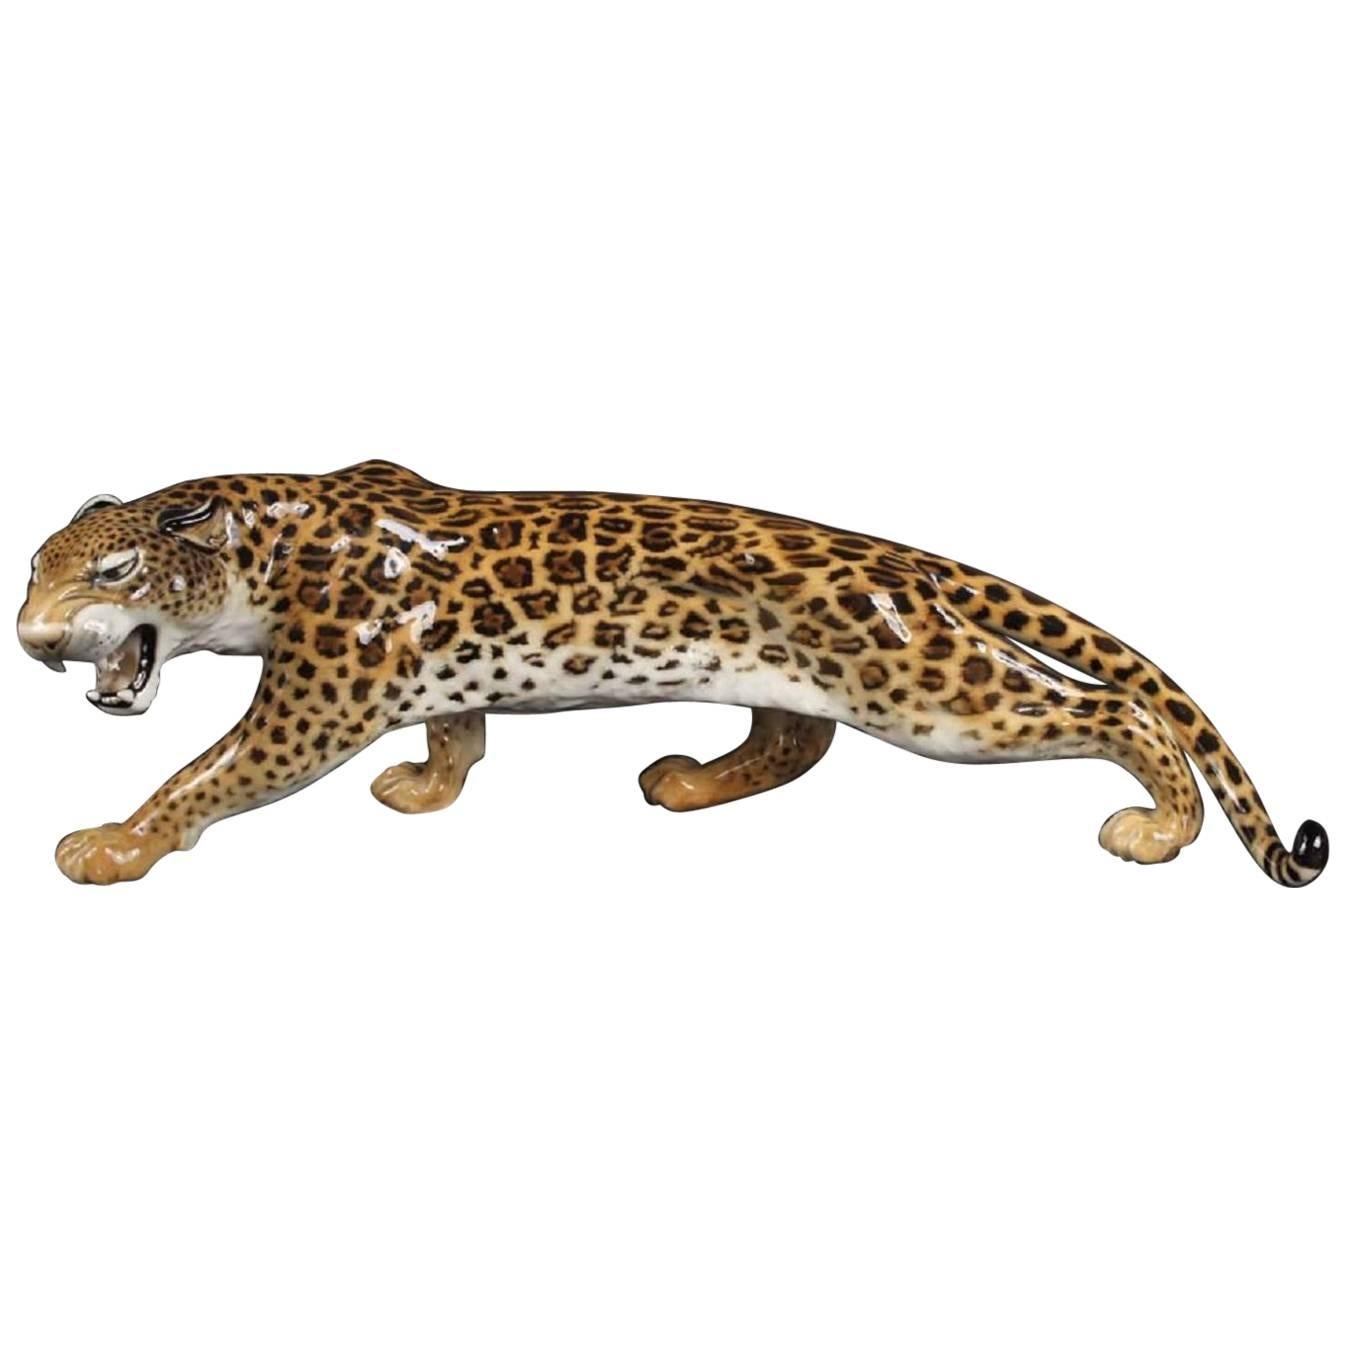 Mid-20th Century Porcelain Leopard Sculpture by the Hutschenreuther Company